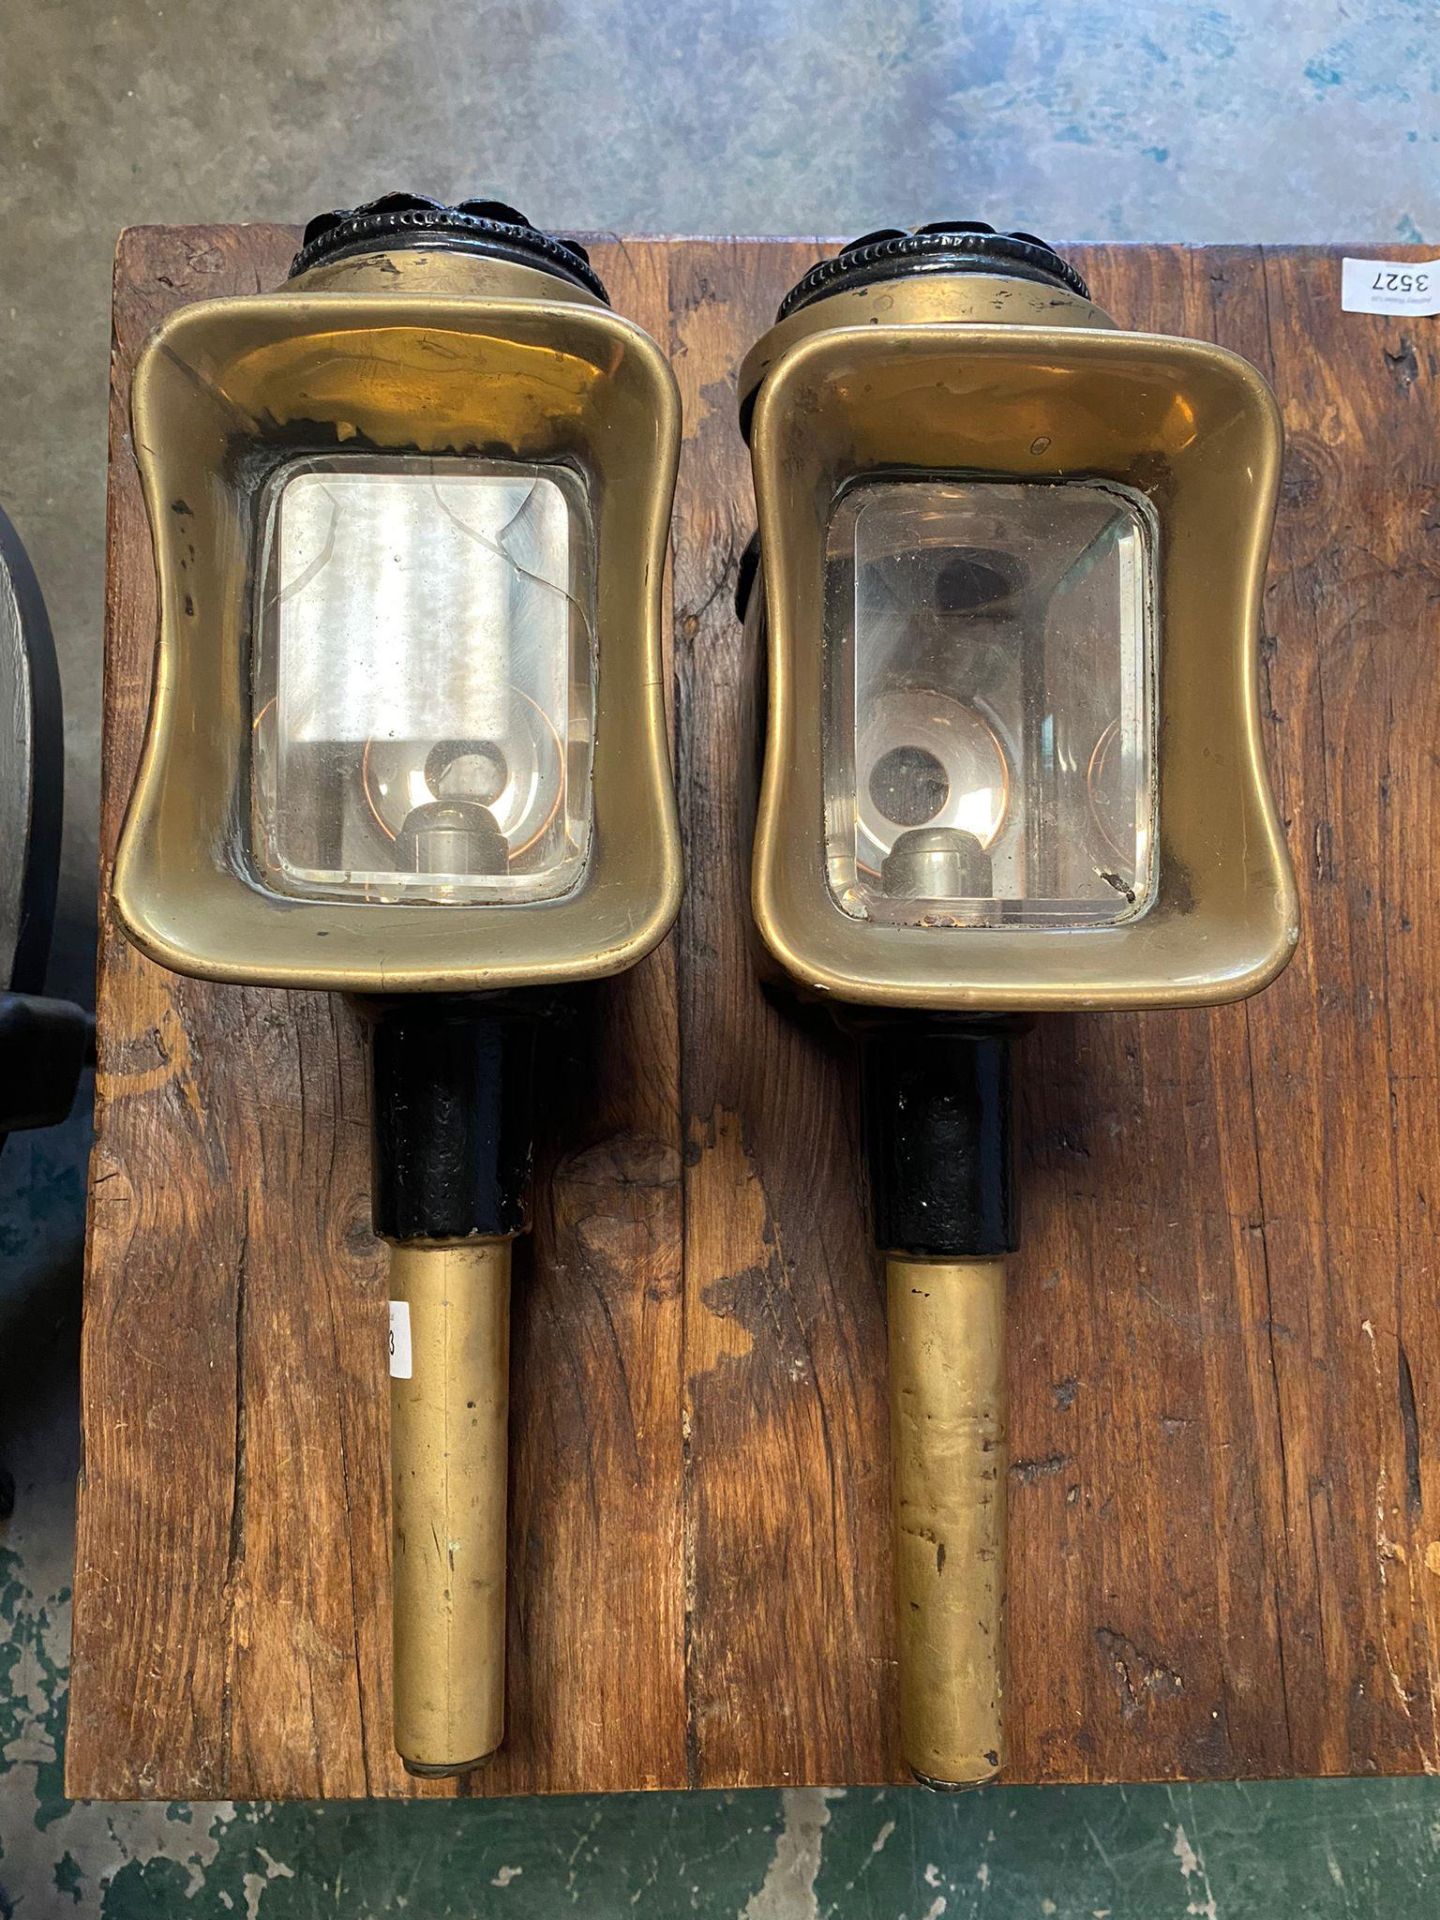 PAIR OF EARLY CARRIAGE LAMPS BY "ROGERS AND SONS" OF OSWESTRY - Image 2 of 4